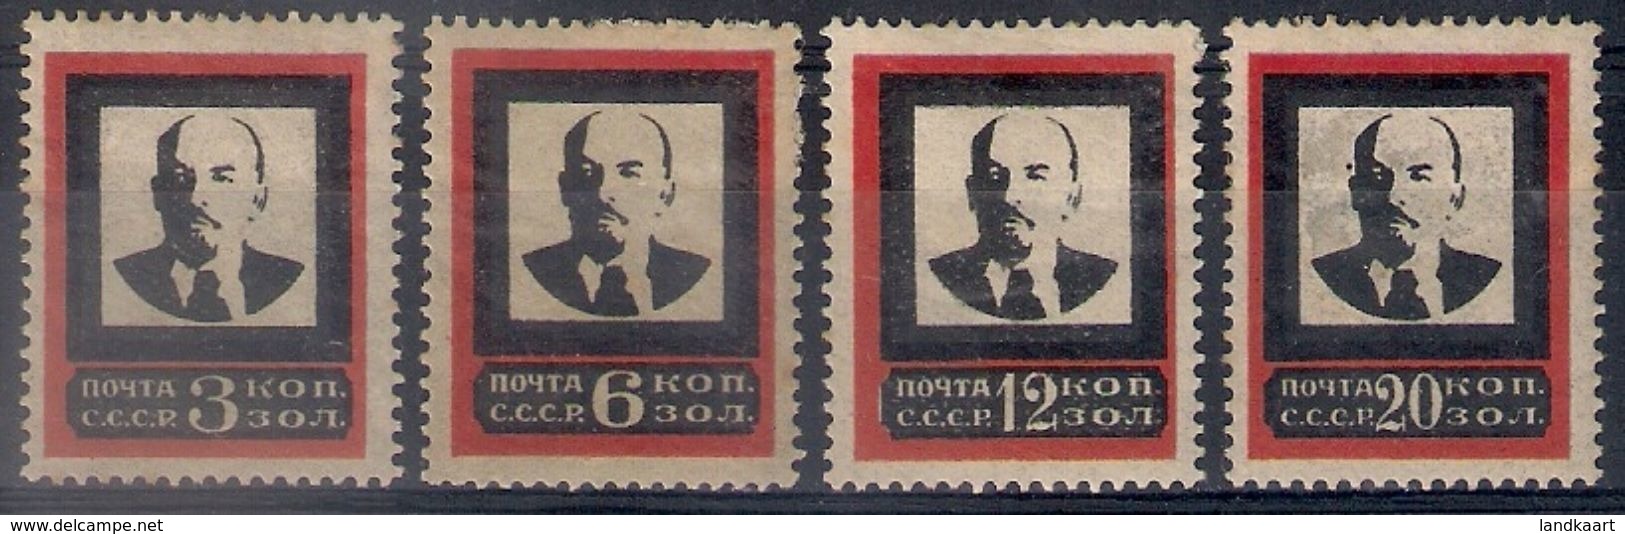 Russia 1924, Michel Nr 238A-41A, MH OG - Unused Stamps